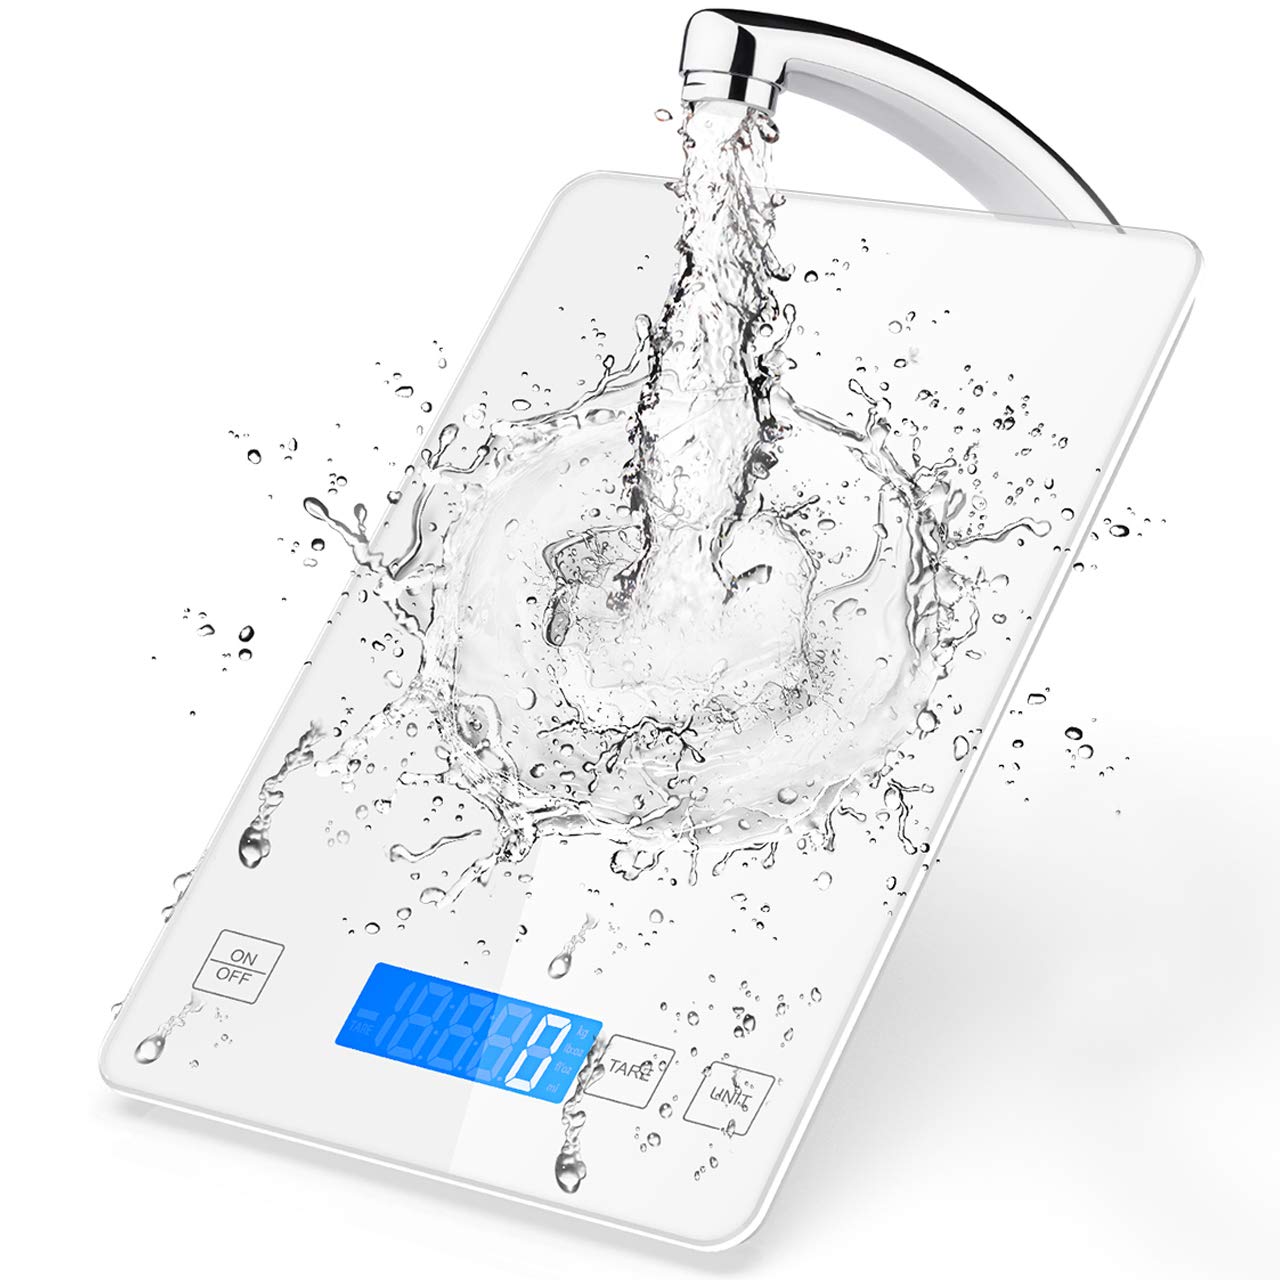 Nicewell Tempered Glass Digital Baking Scale